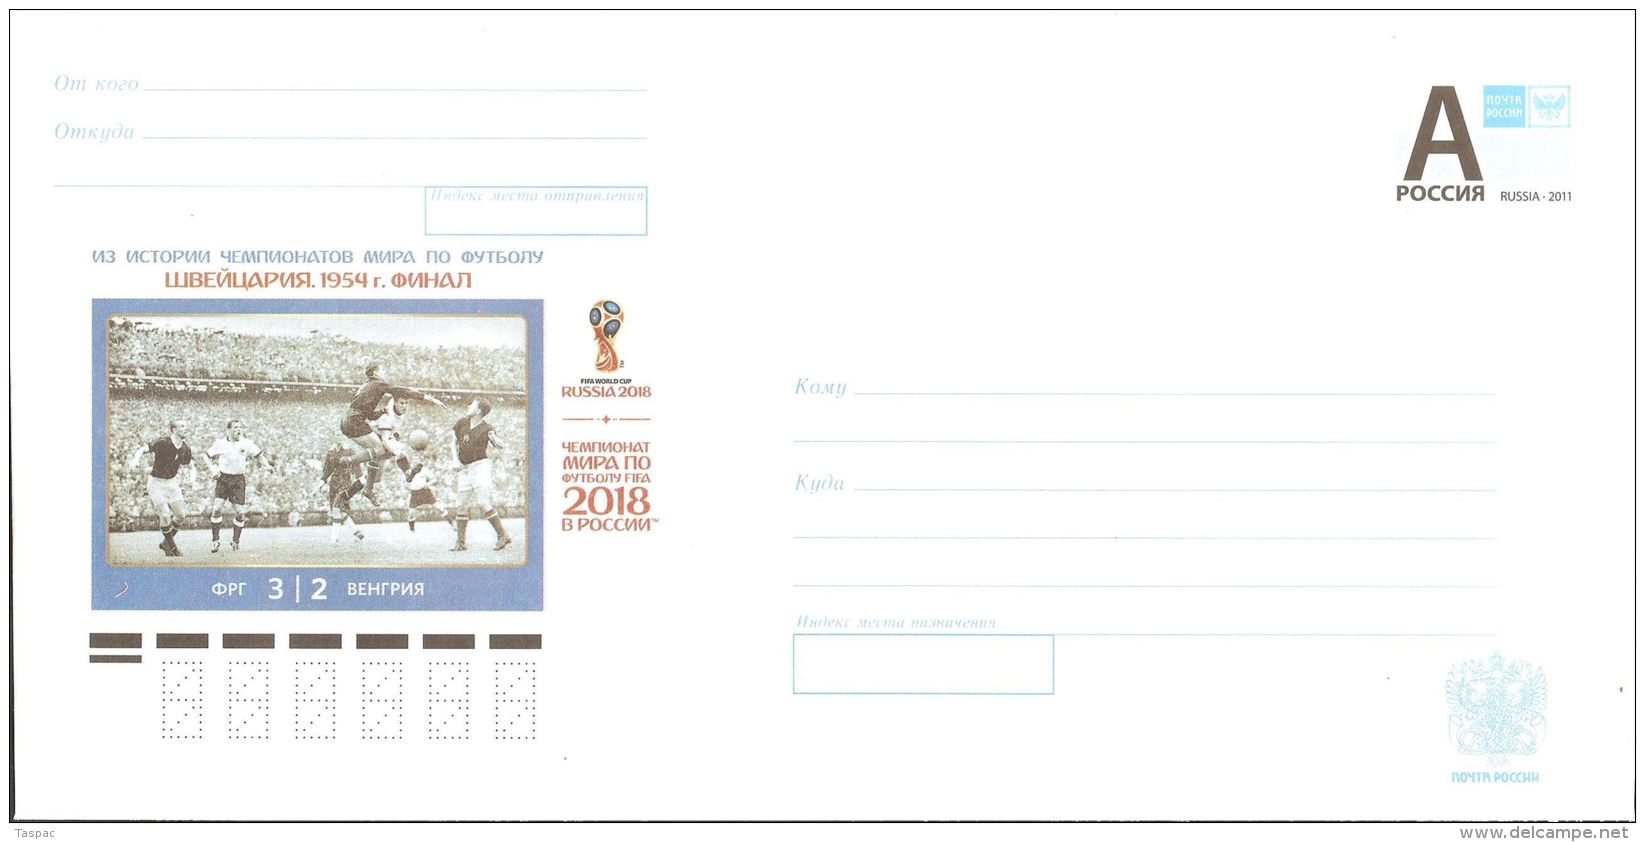 Russia 2015 # 147 Postal Stationery Cover Unused - History Of World Cup Soccer Championship, Switzerland 1954 - 1954 – Suisse